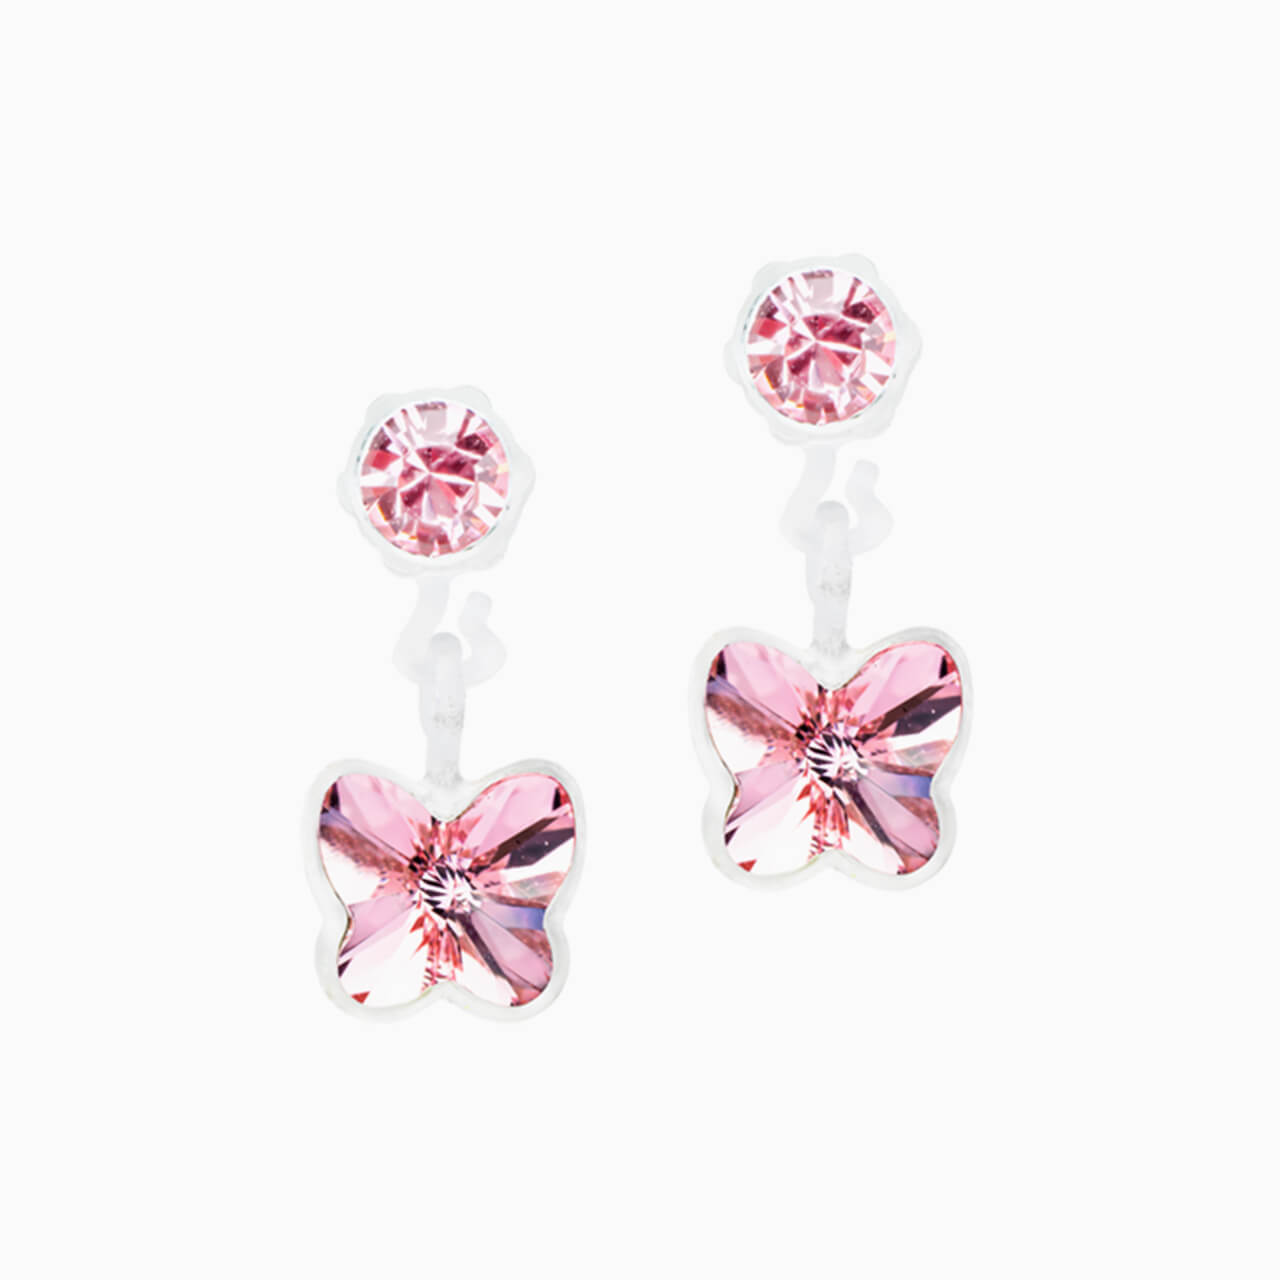 Medical Plastic 8mm Brilliance Puck Hollow Earrings